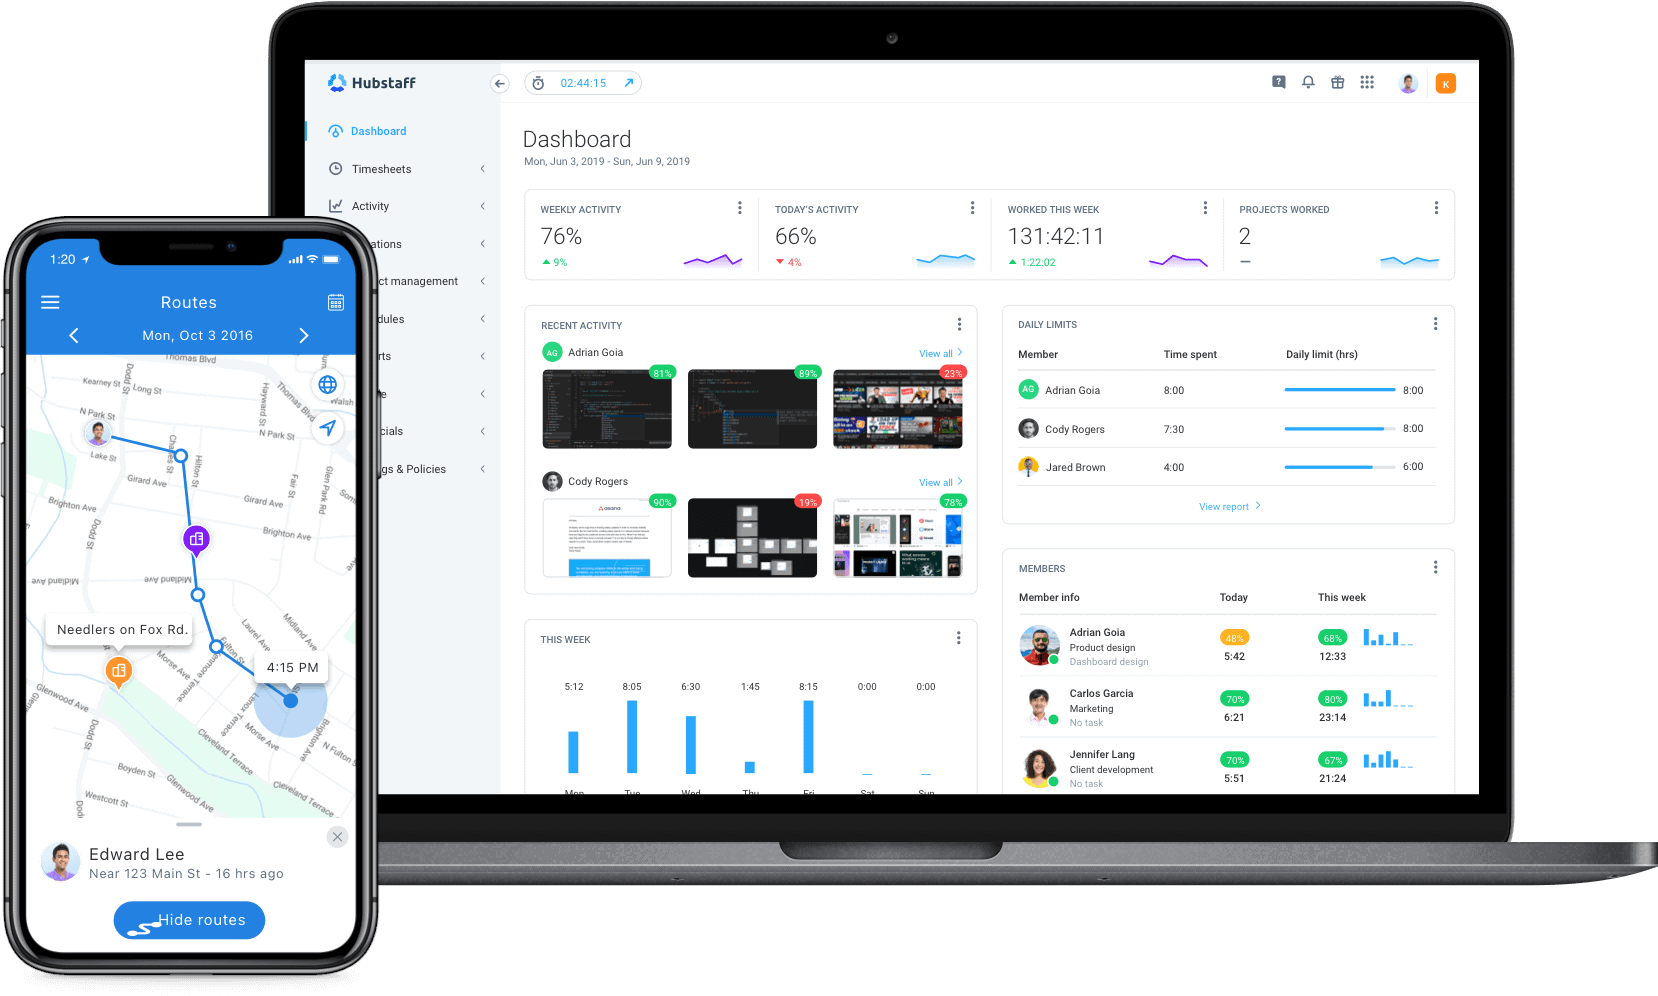 Hubstaff interface shown on a mobile device and desktop